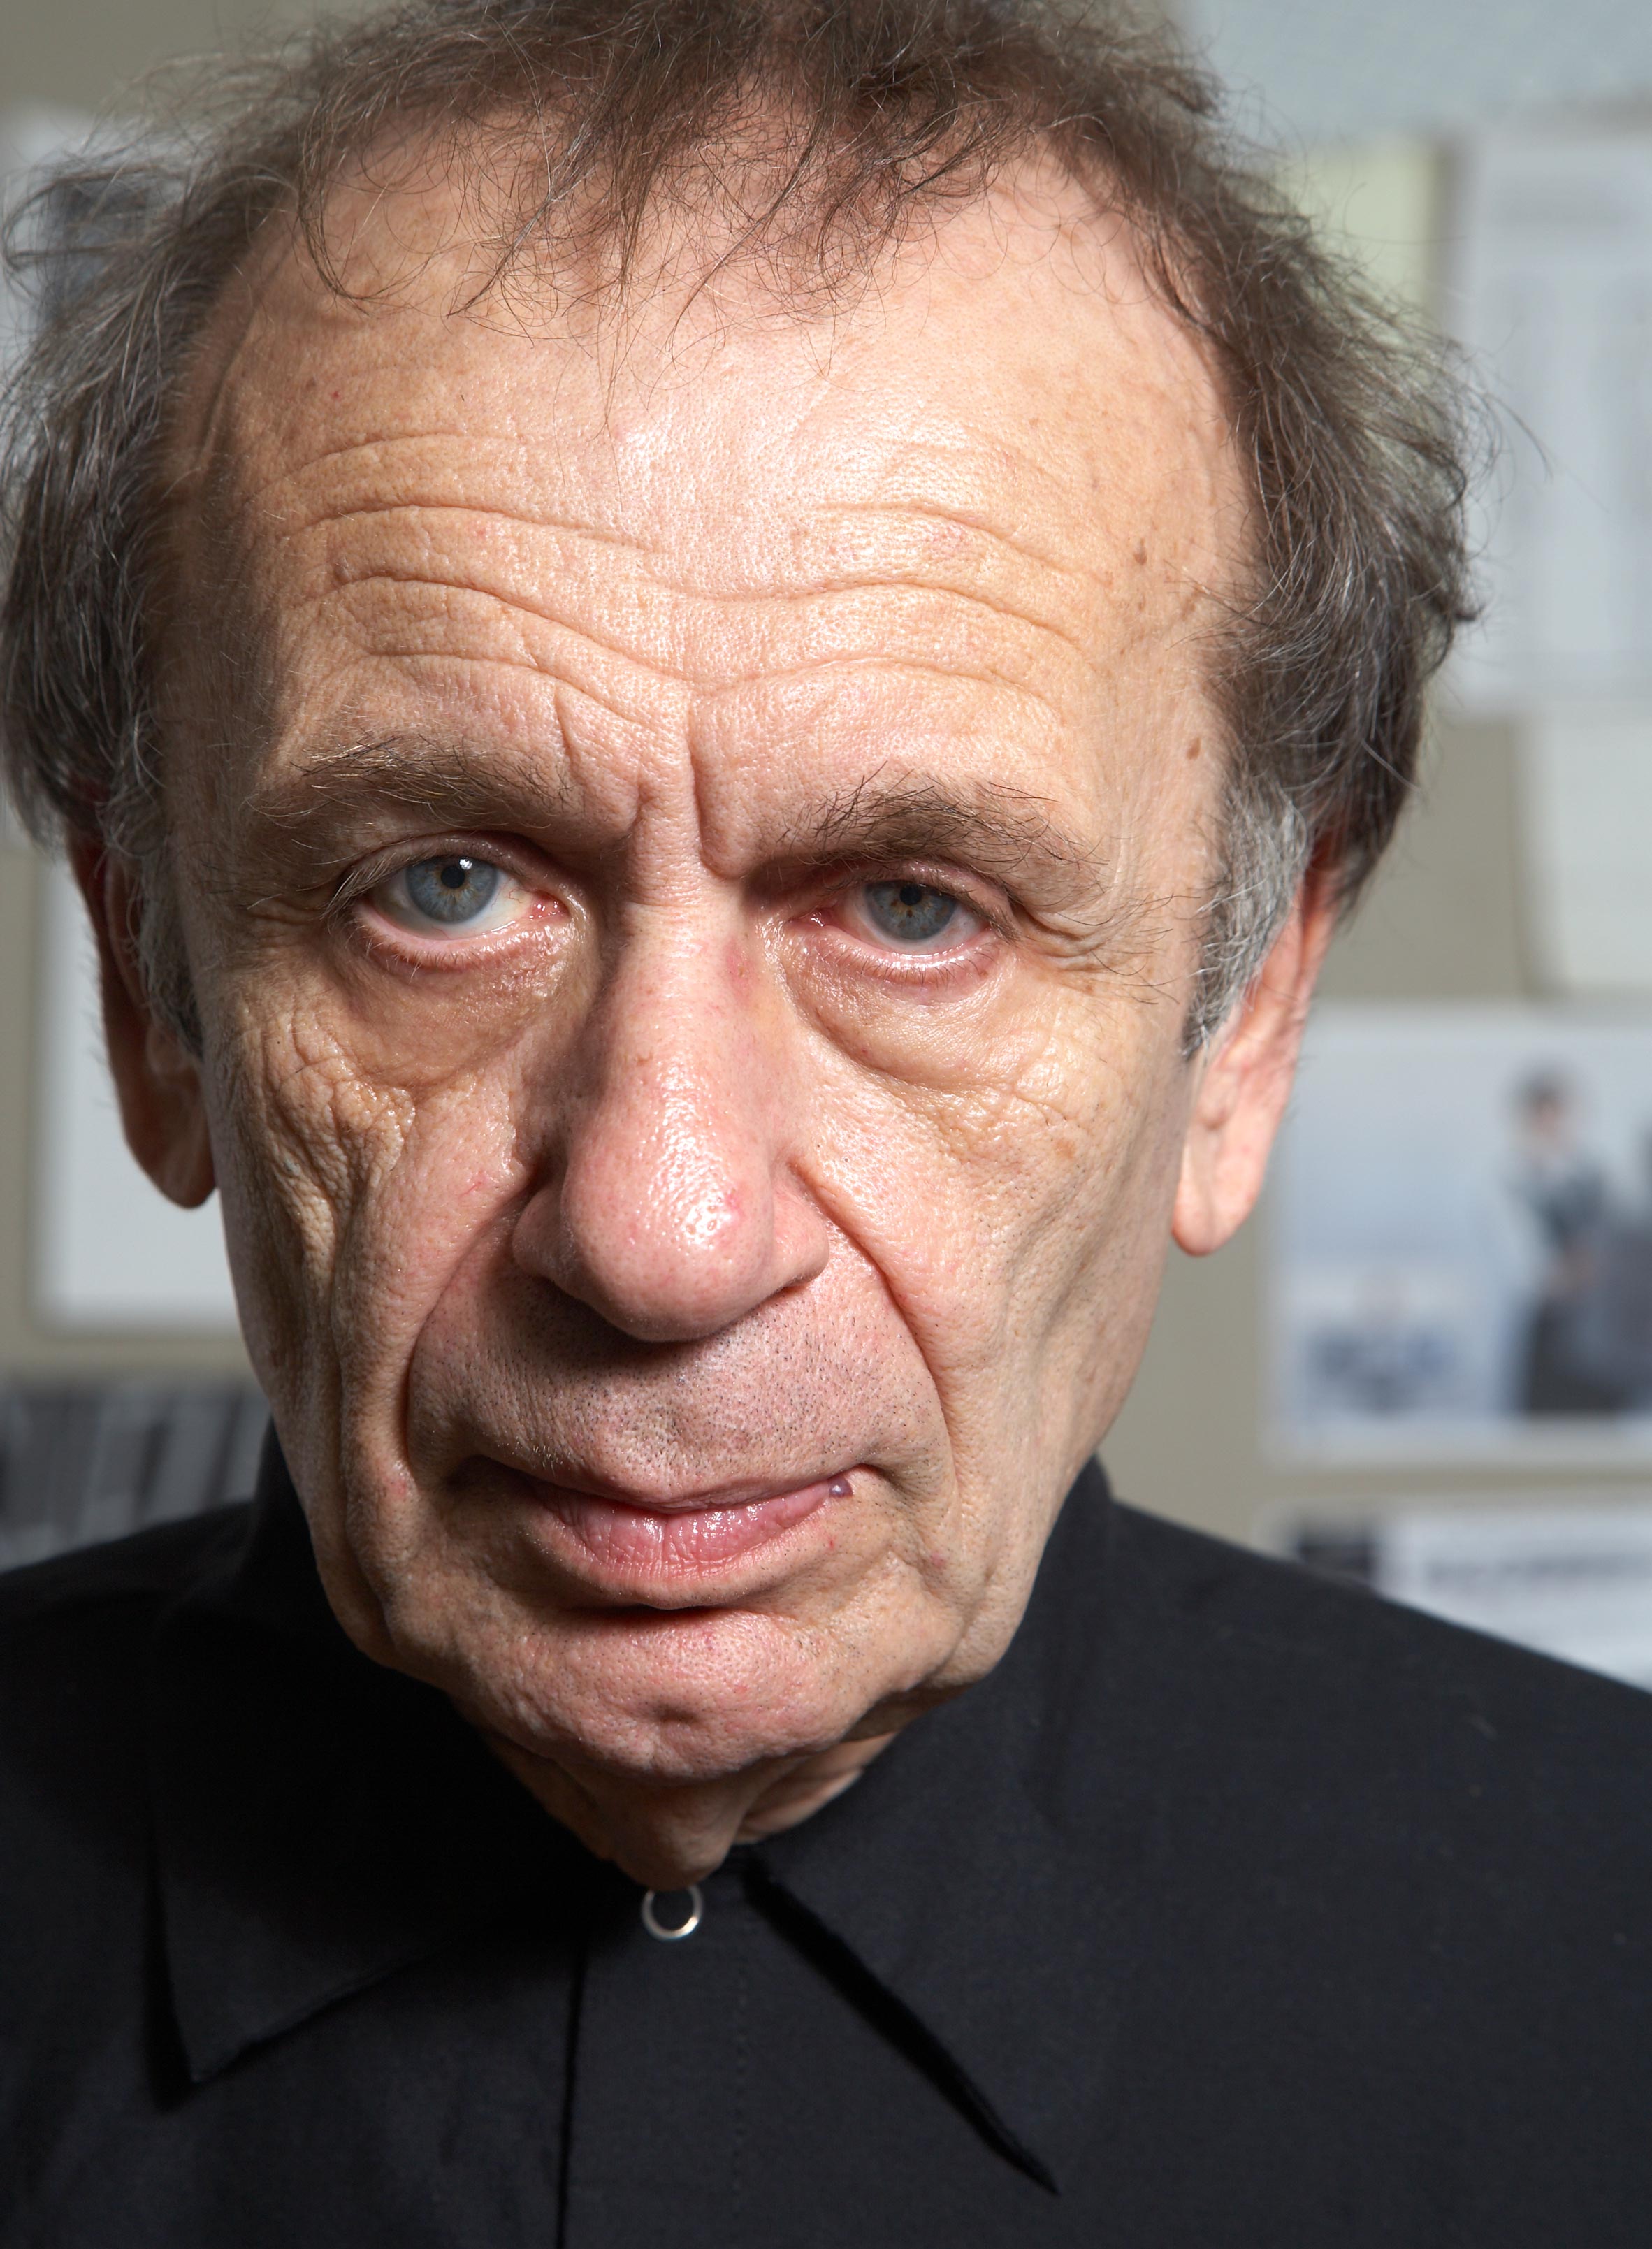 "Subversive, shocking and truly unique" artist and architect Vito Acconci dies